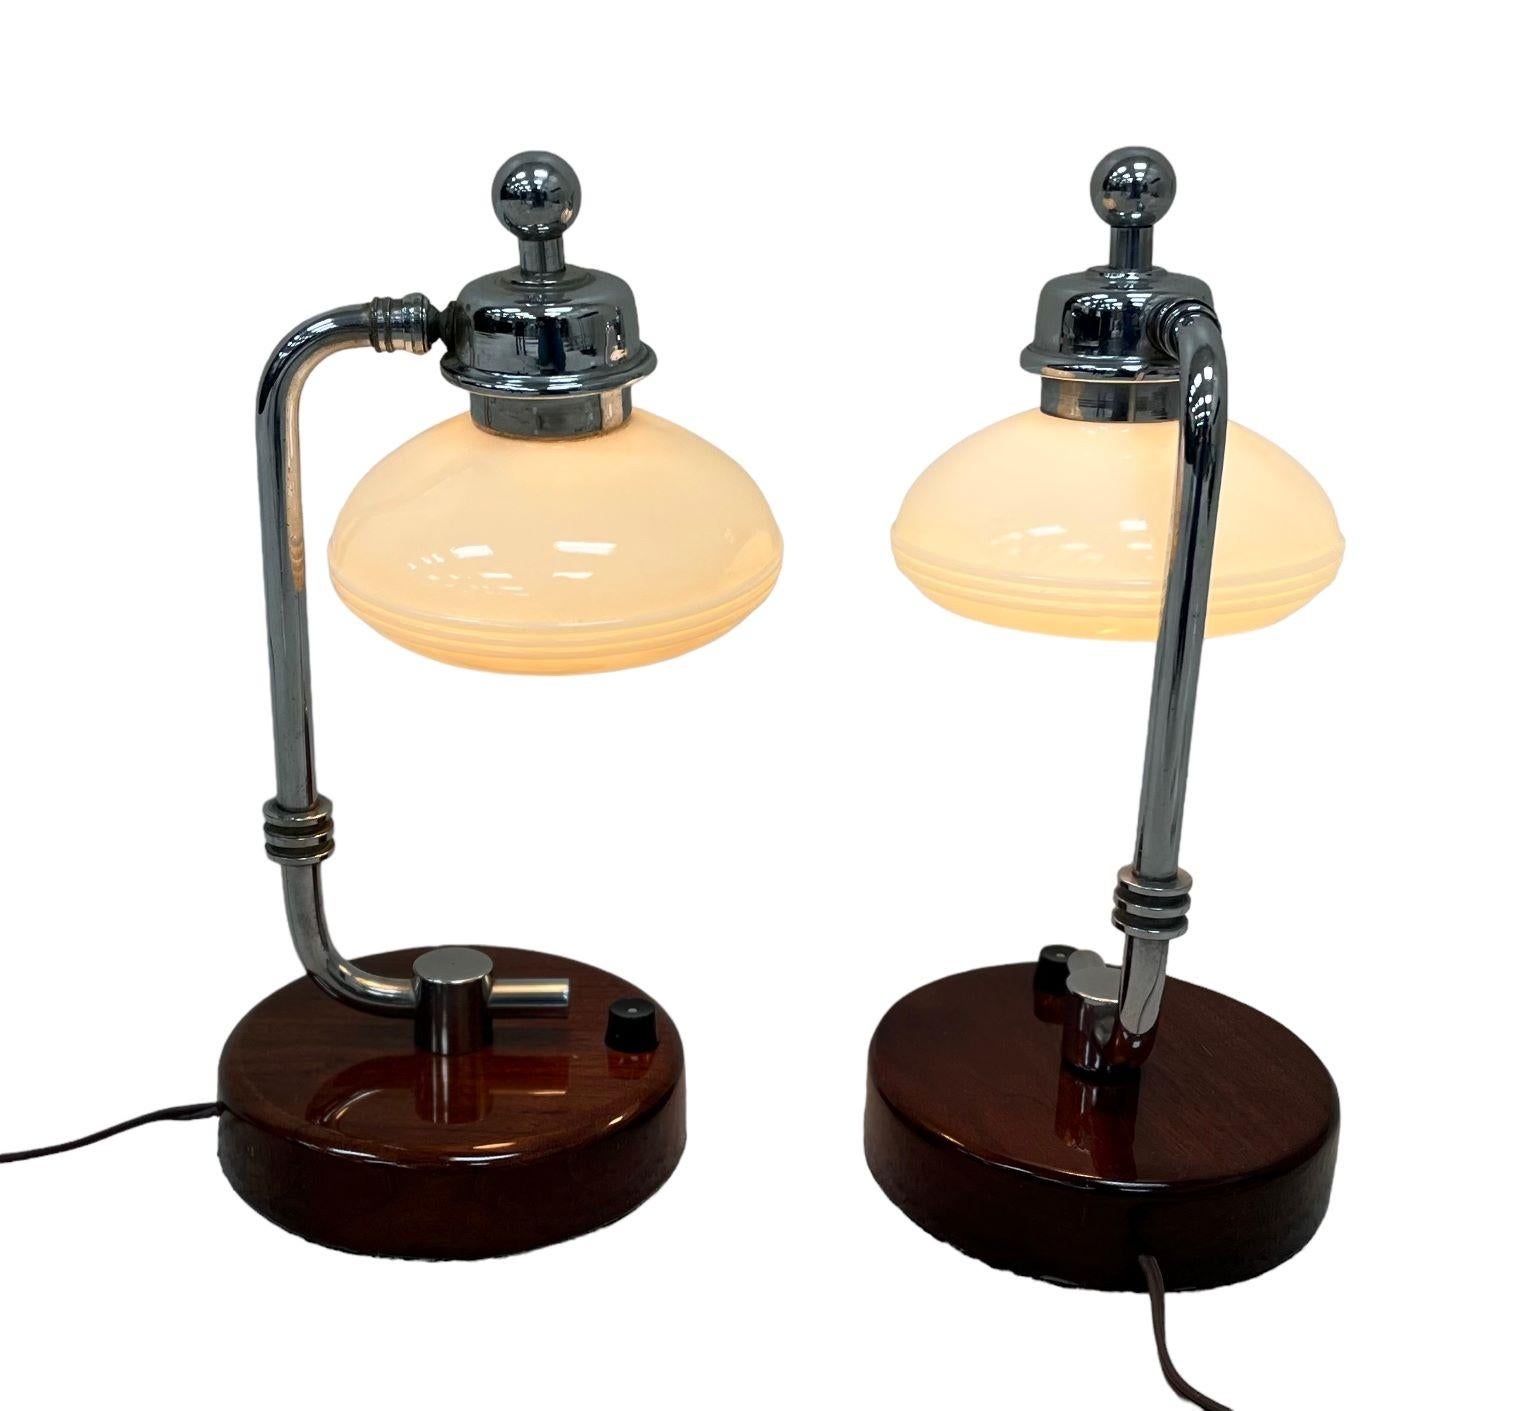 Mid-20th Century Exceptional Machine Age Art Deco Walnut and Chrome Table Lamps American C.1930’s For Sale